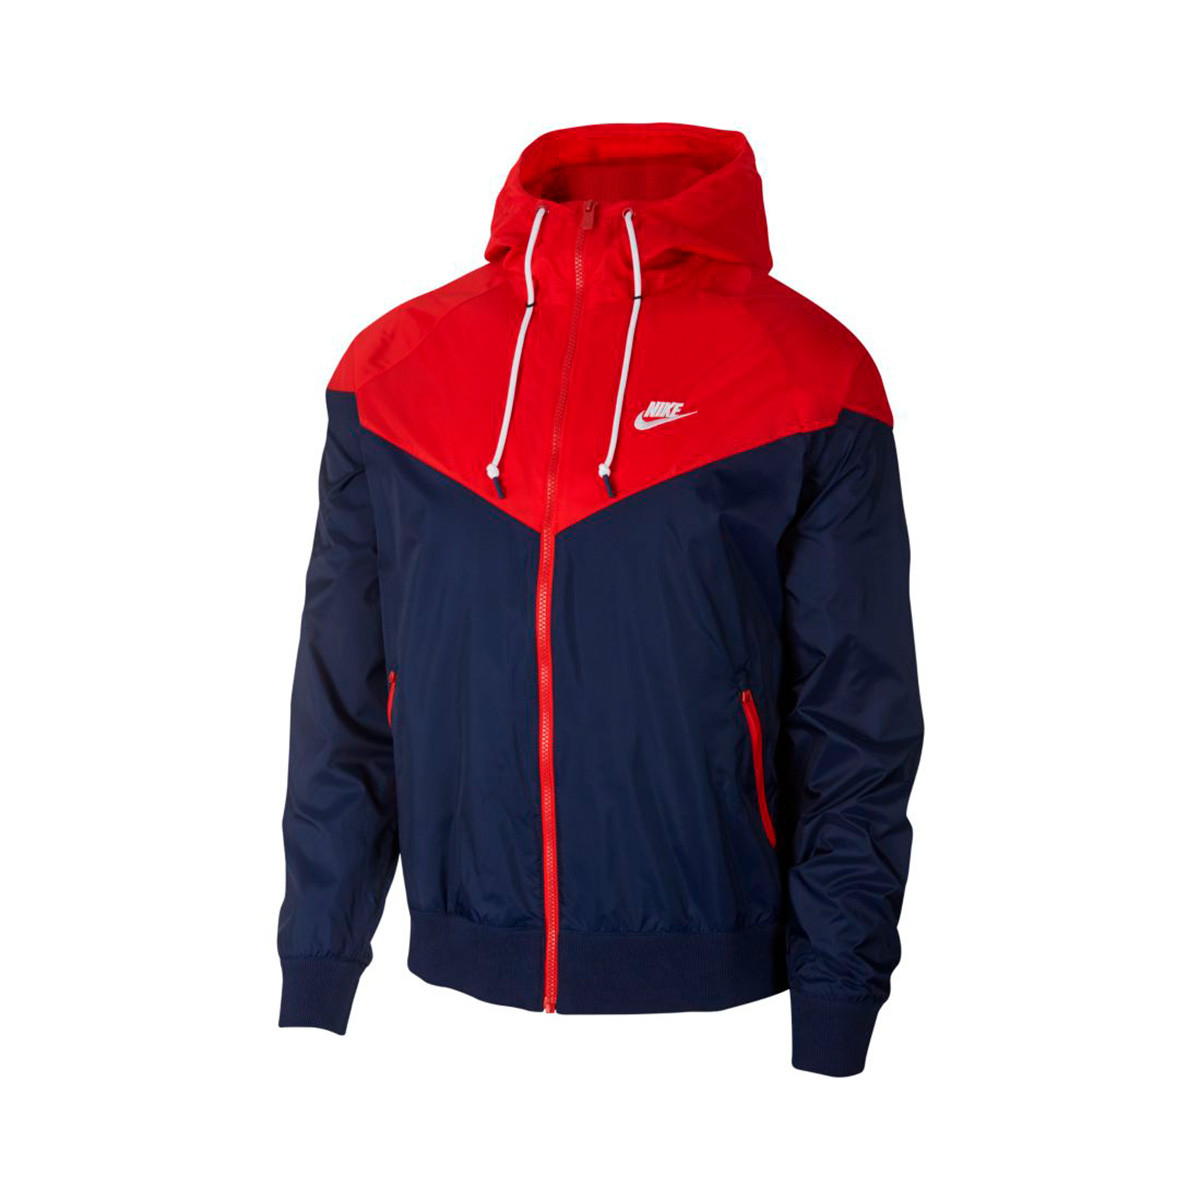 navy blue and red nike windbreaker